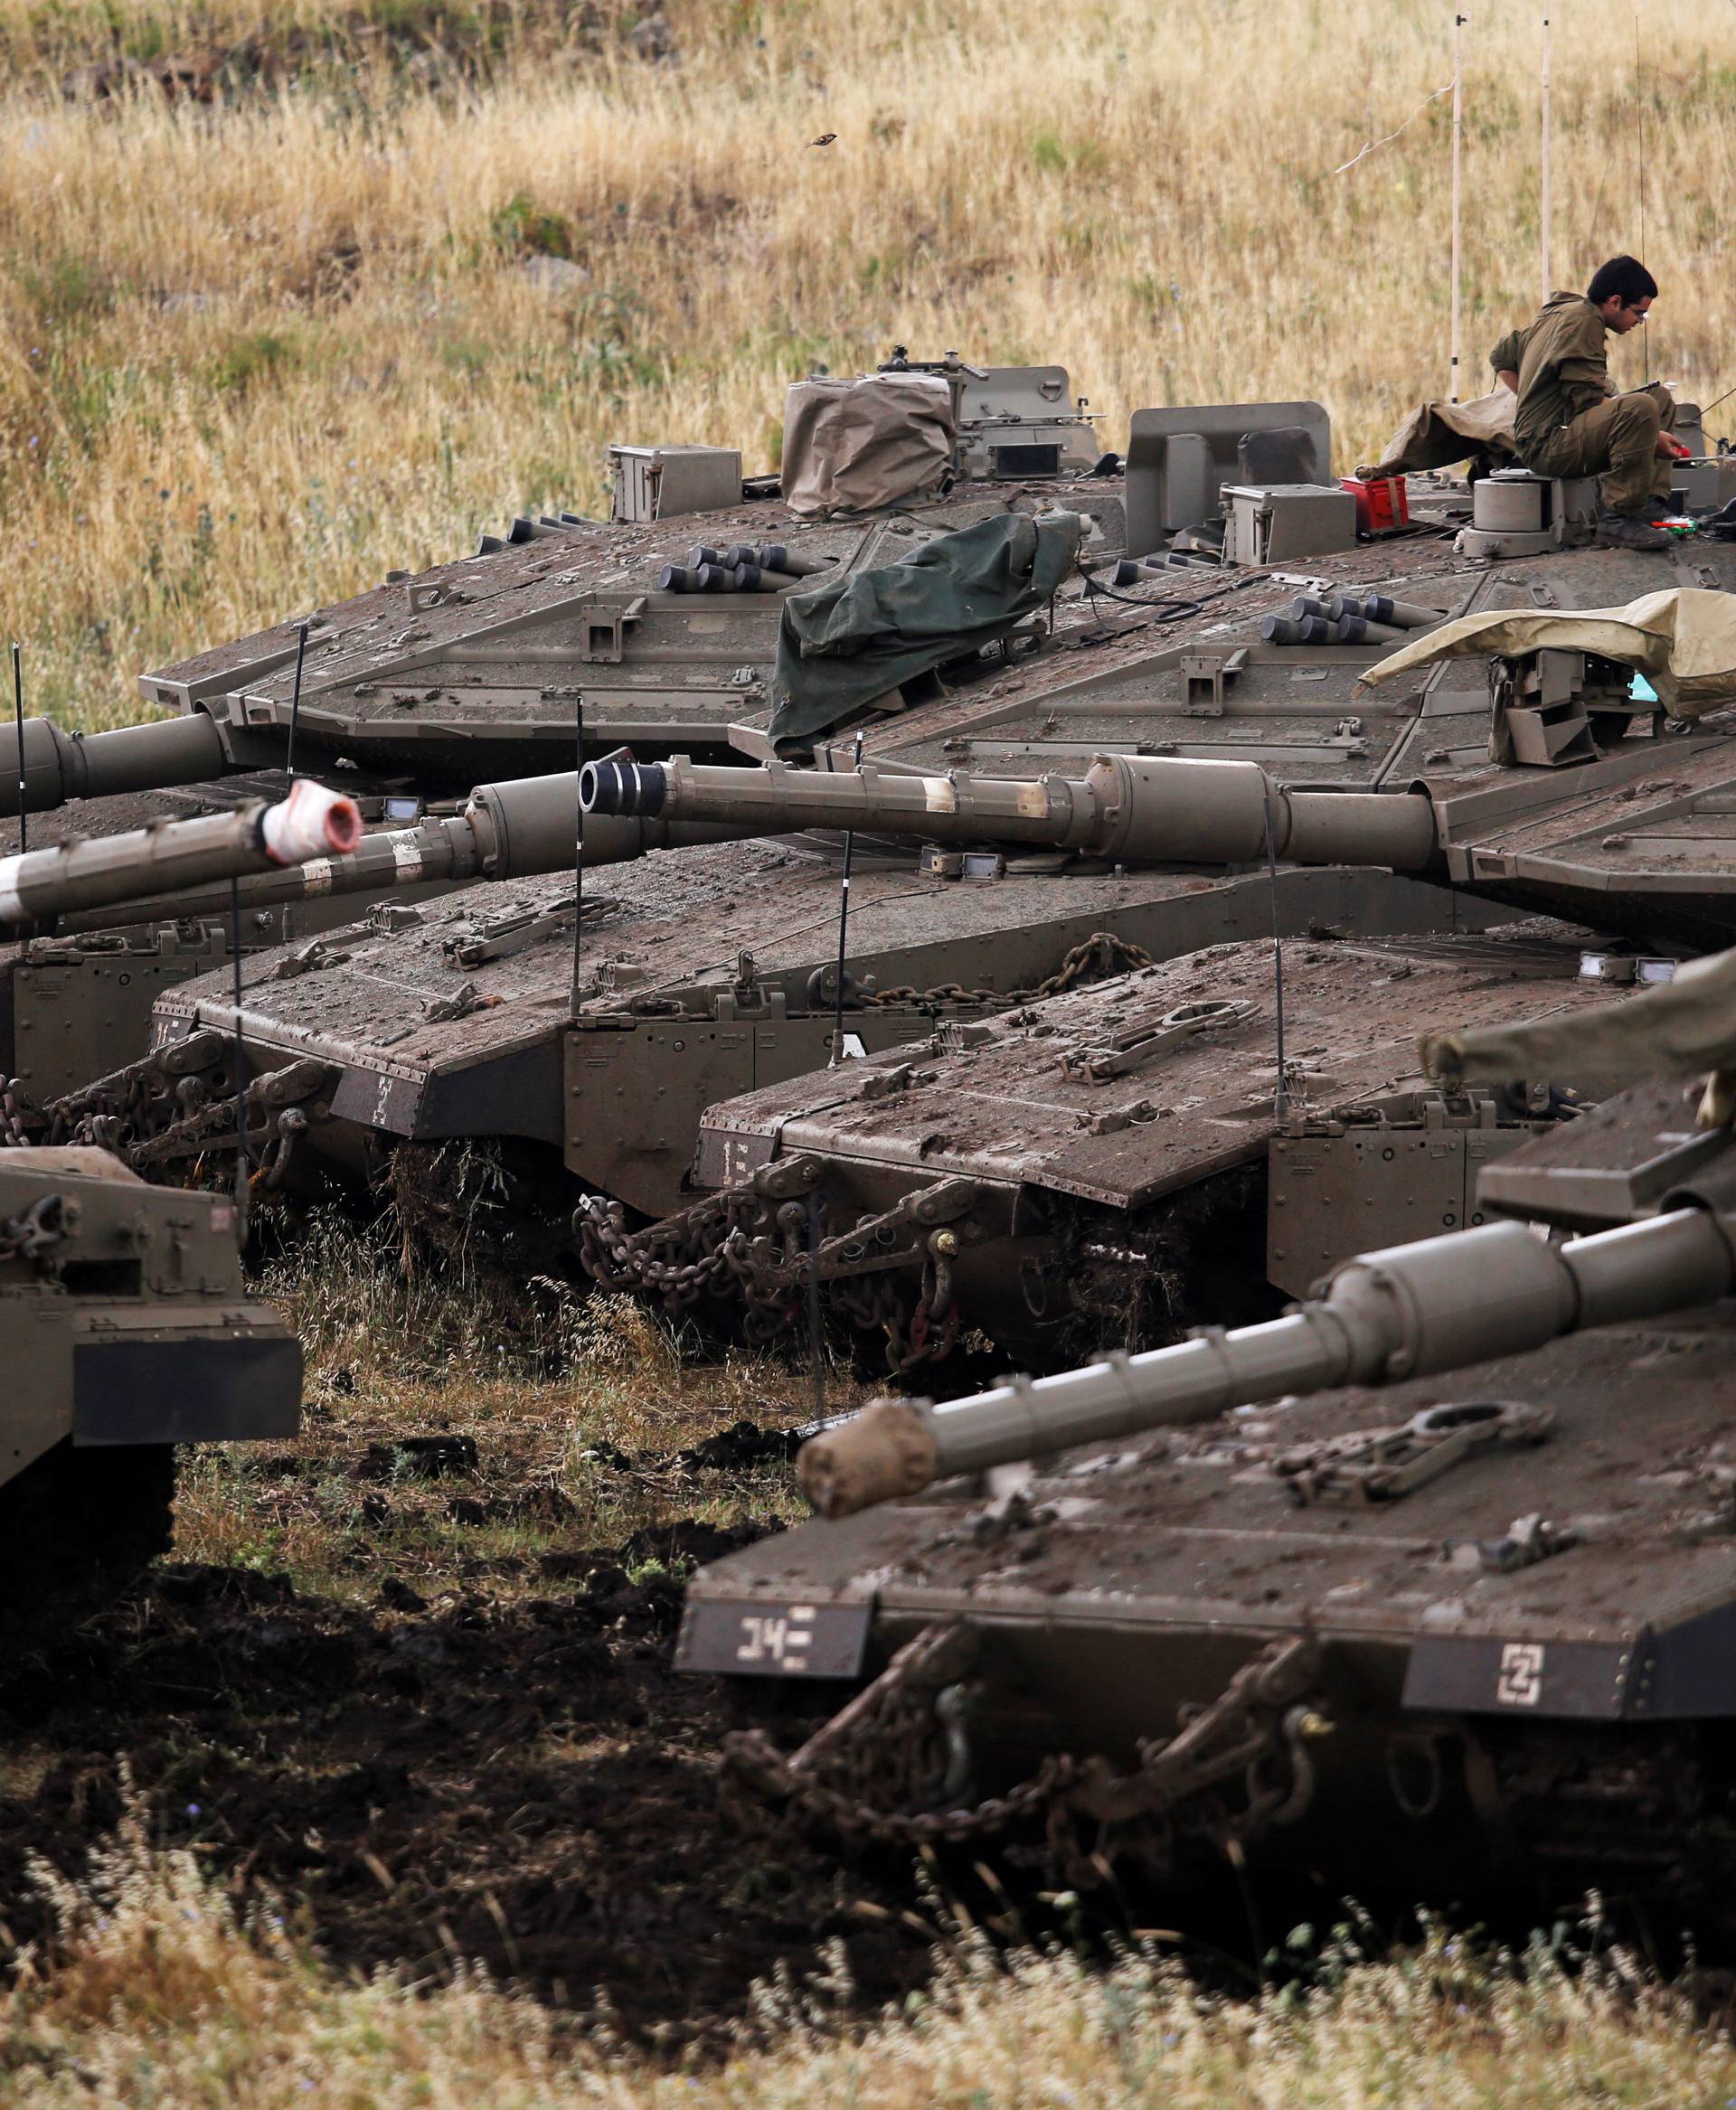 Israeli soldiers sit on tanks near the Israeli side of the border with Syria in the Israeli-occupied Golan Heights